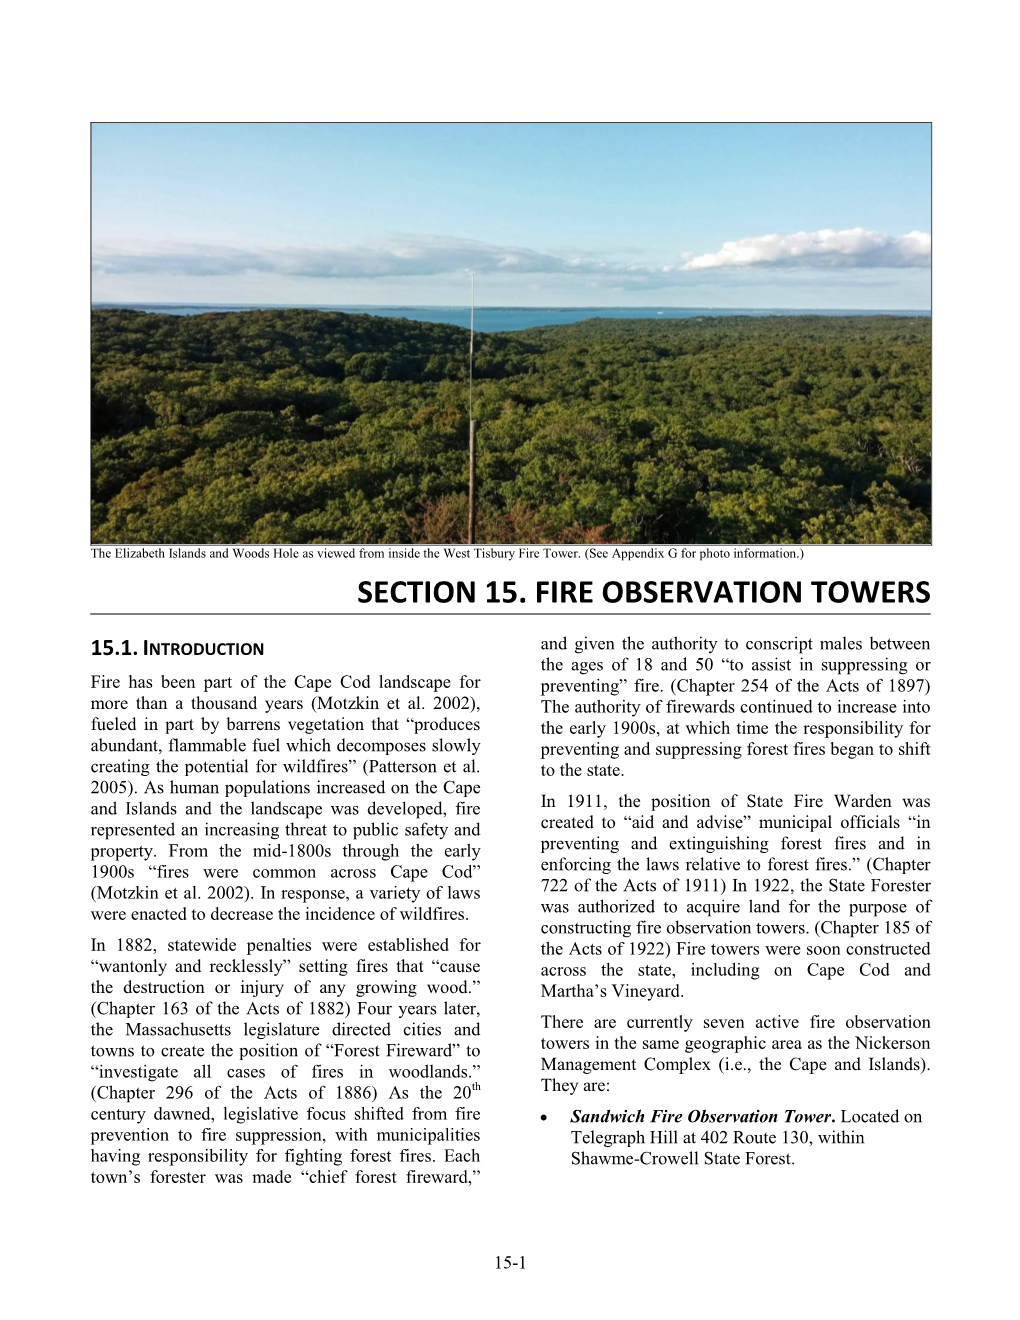 Section 15. Fire Observation Towers